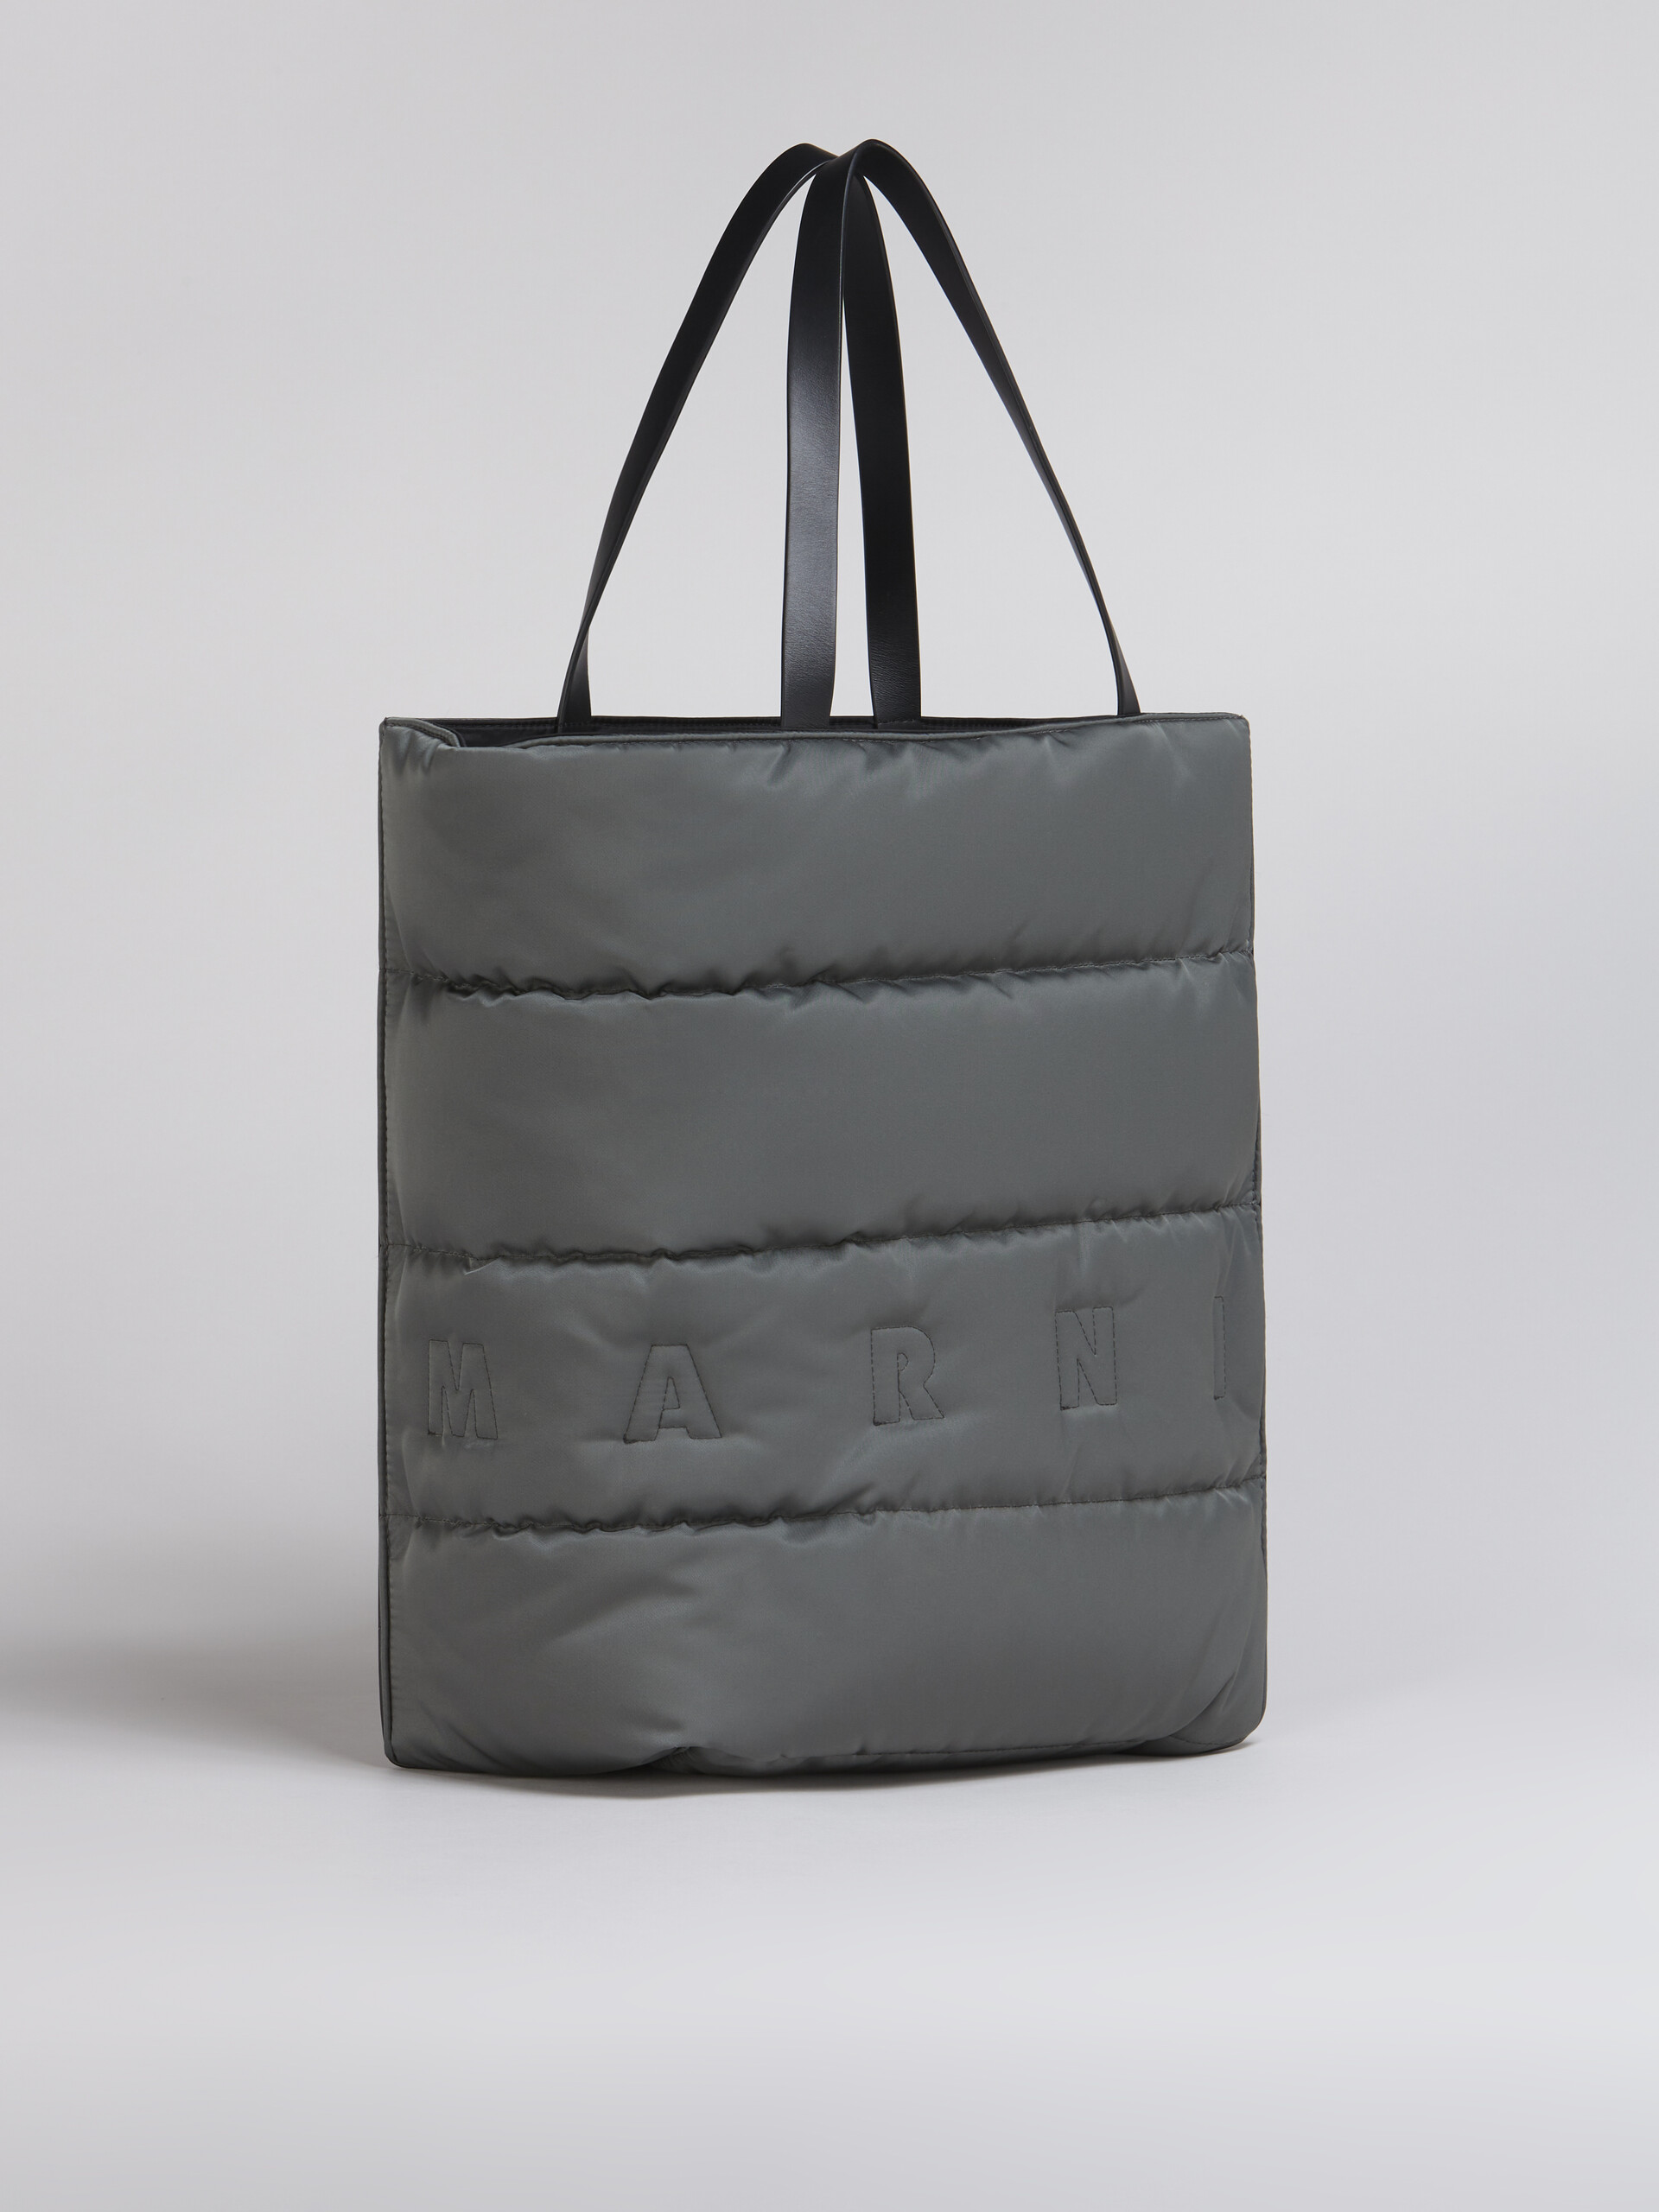 MUSEO tote bag in quilted nylon - Shopping Bags - Image 6